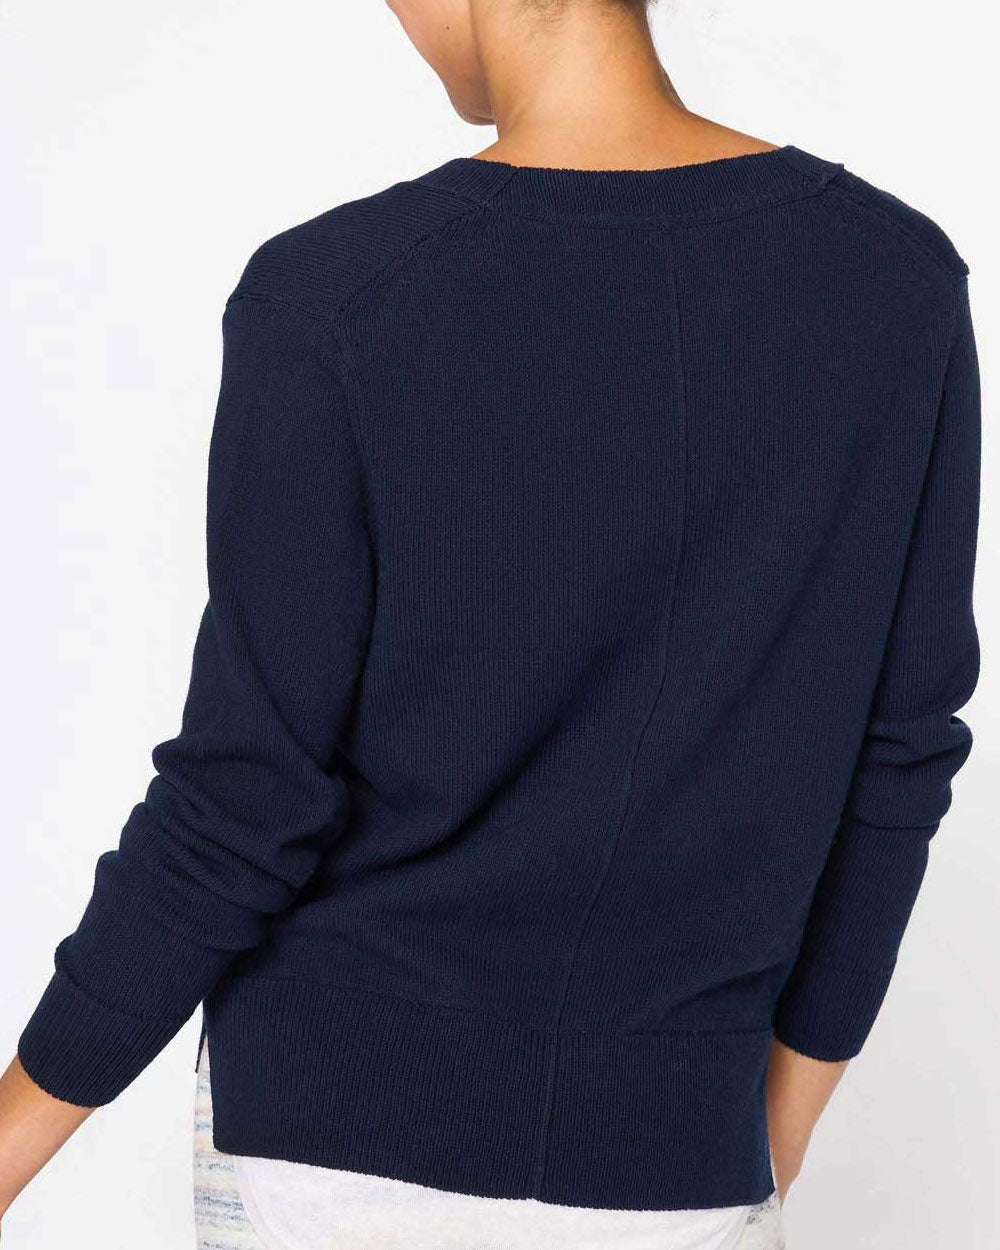 Navy and White Roan Layered Henley